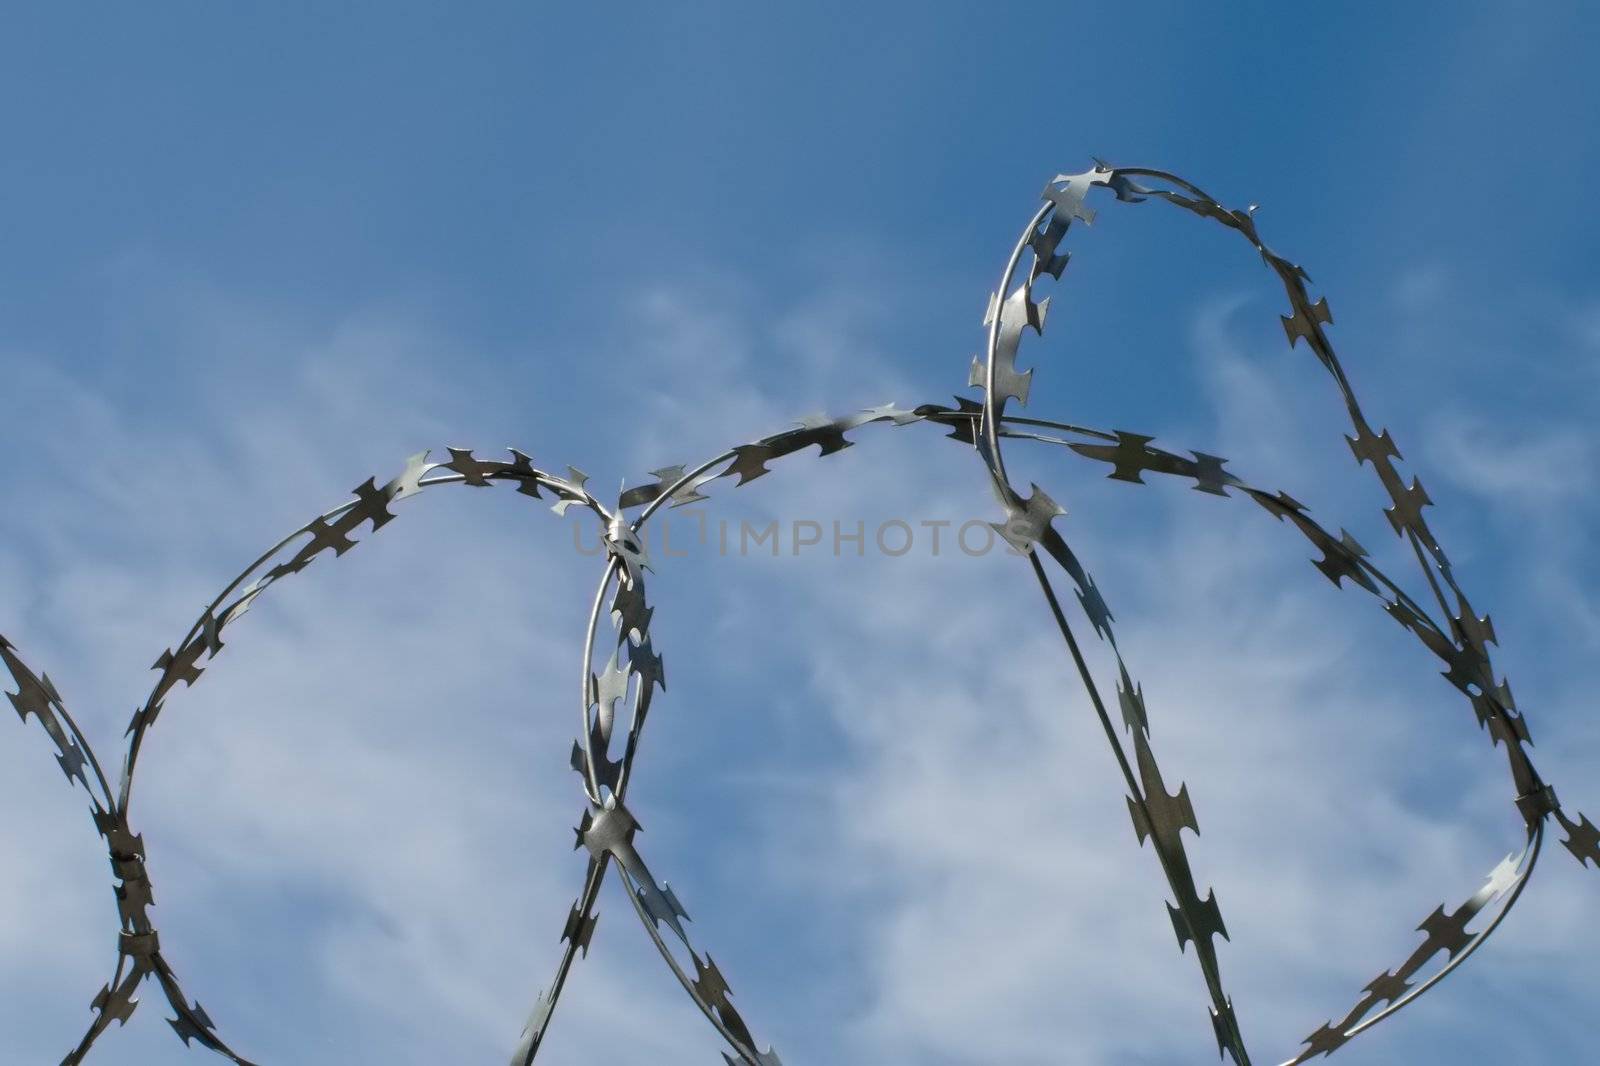 Barbed wire fence by ia_64